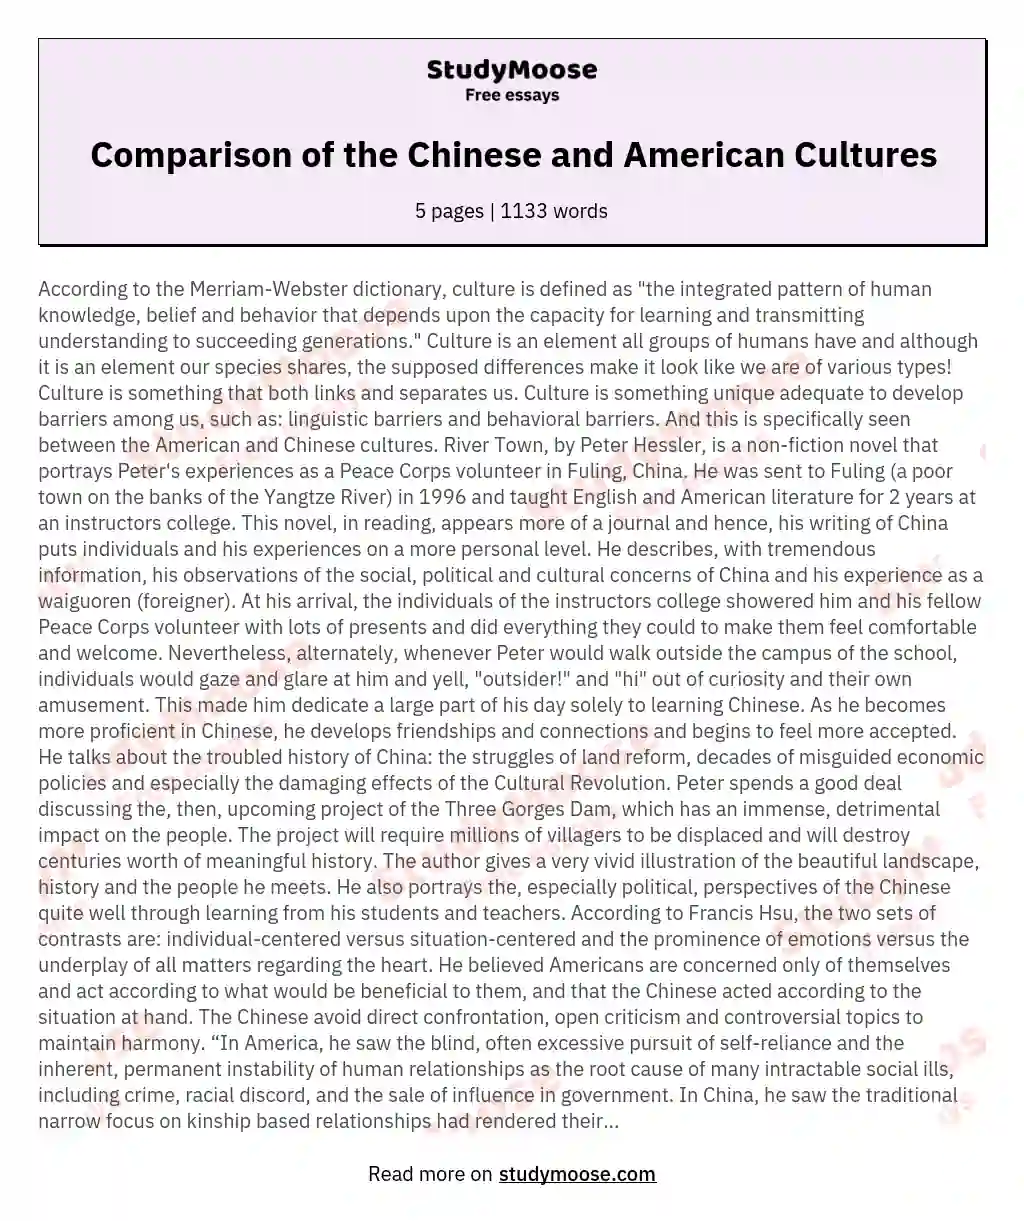 Comparison of the Chinese and American Cultures essay